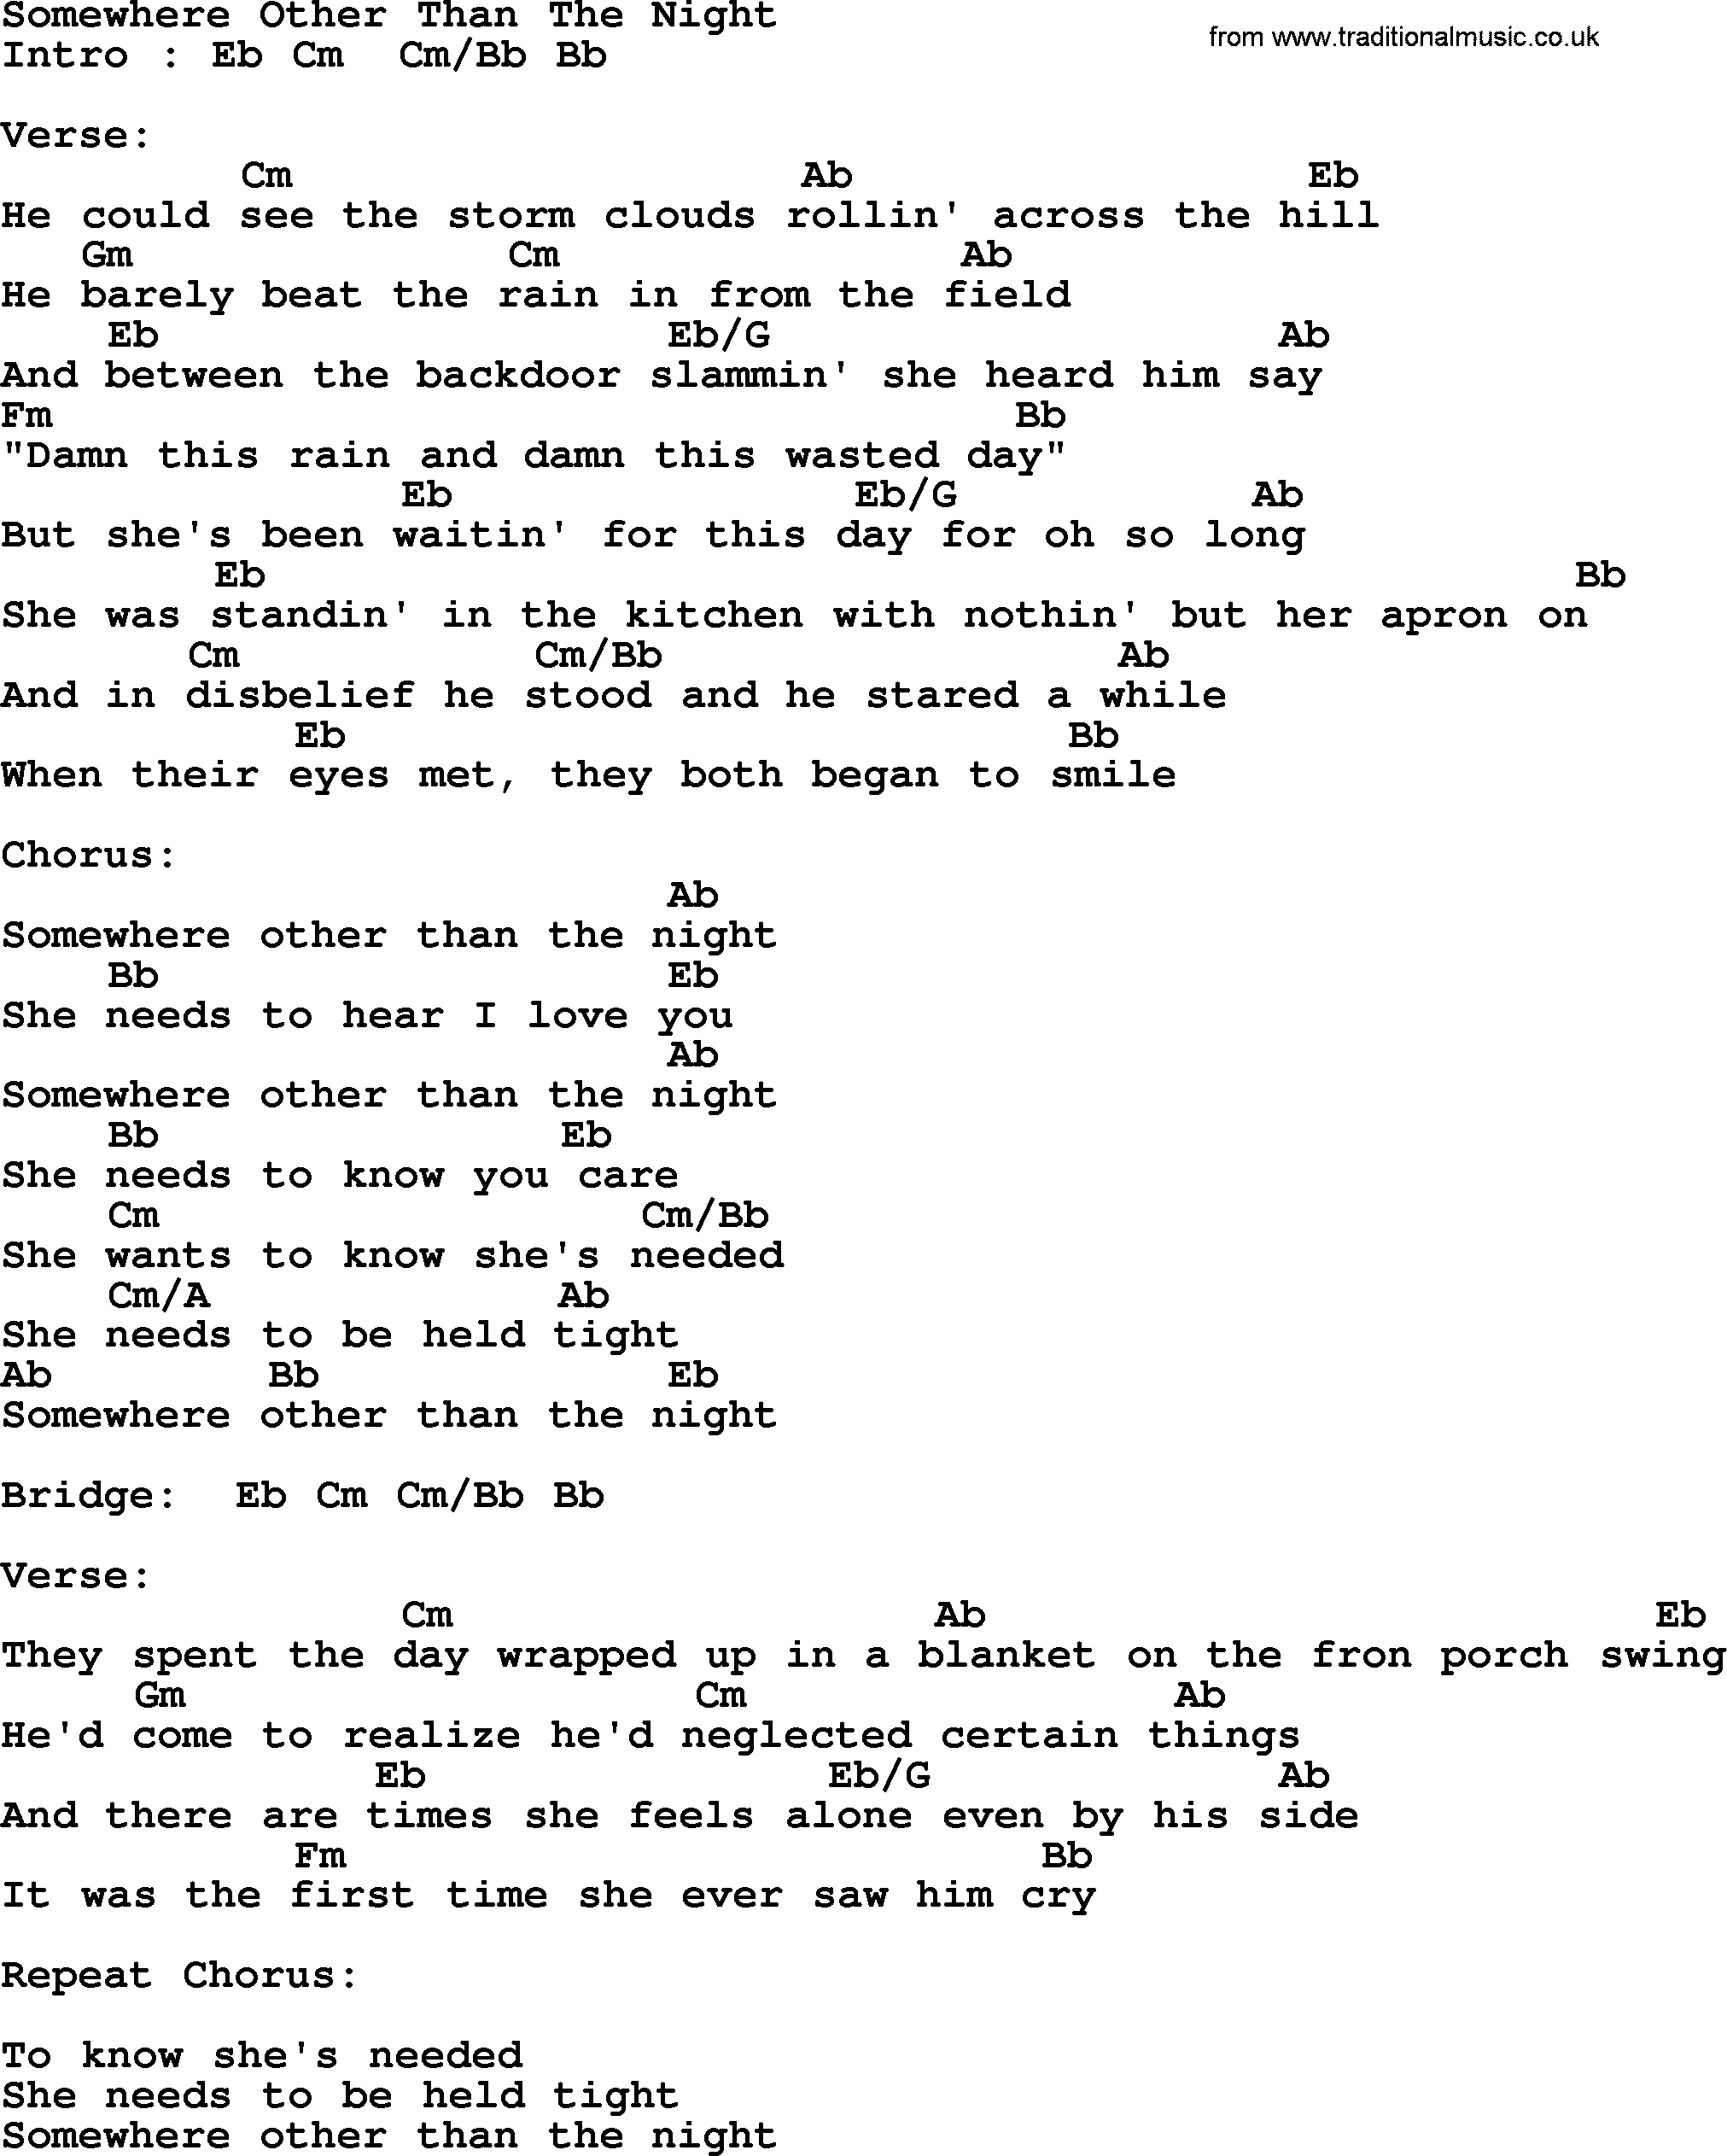 Garth Brooks song: Somewhere Other Than The Night, lyrics and chords